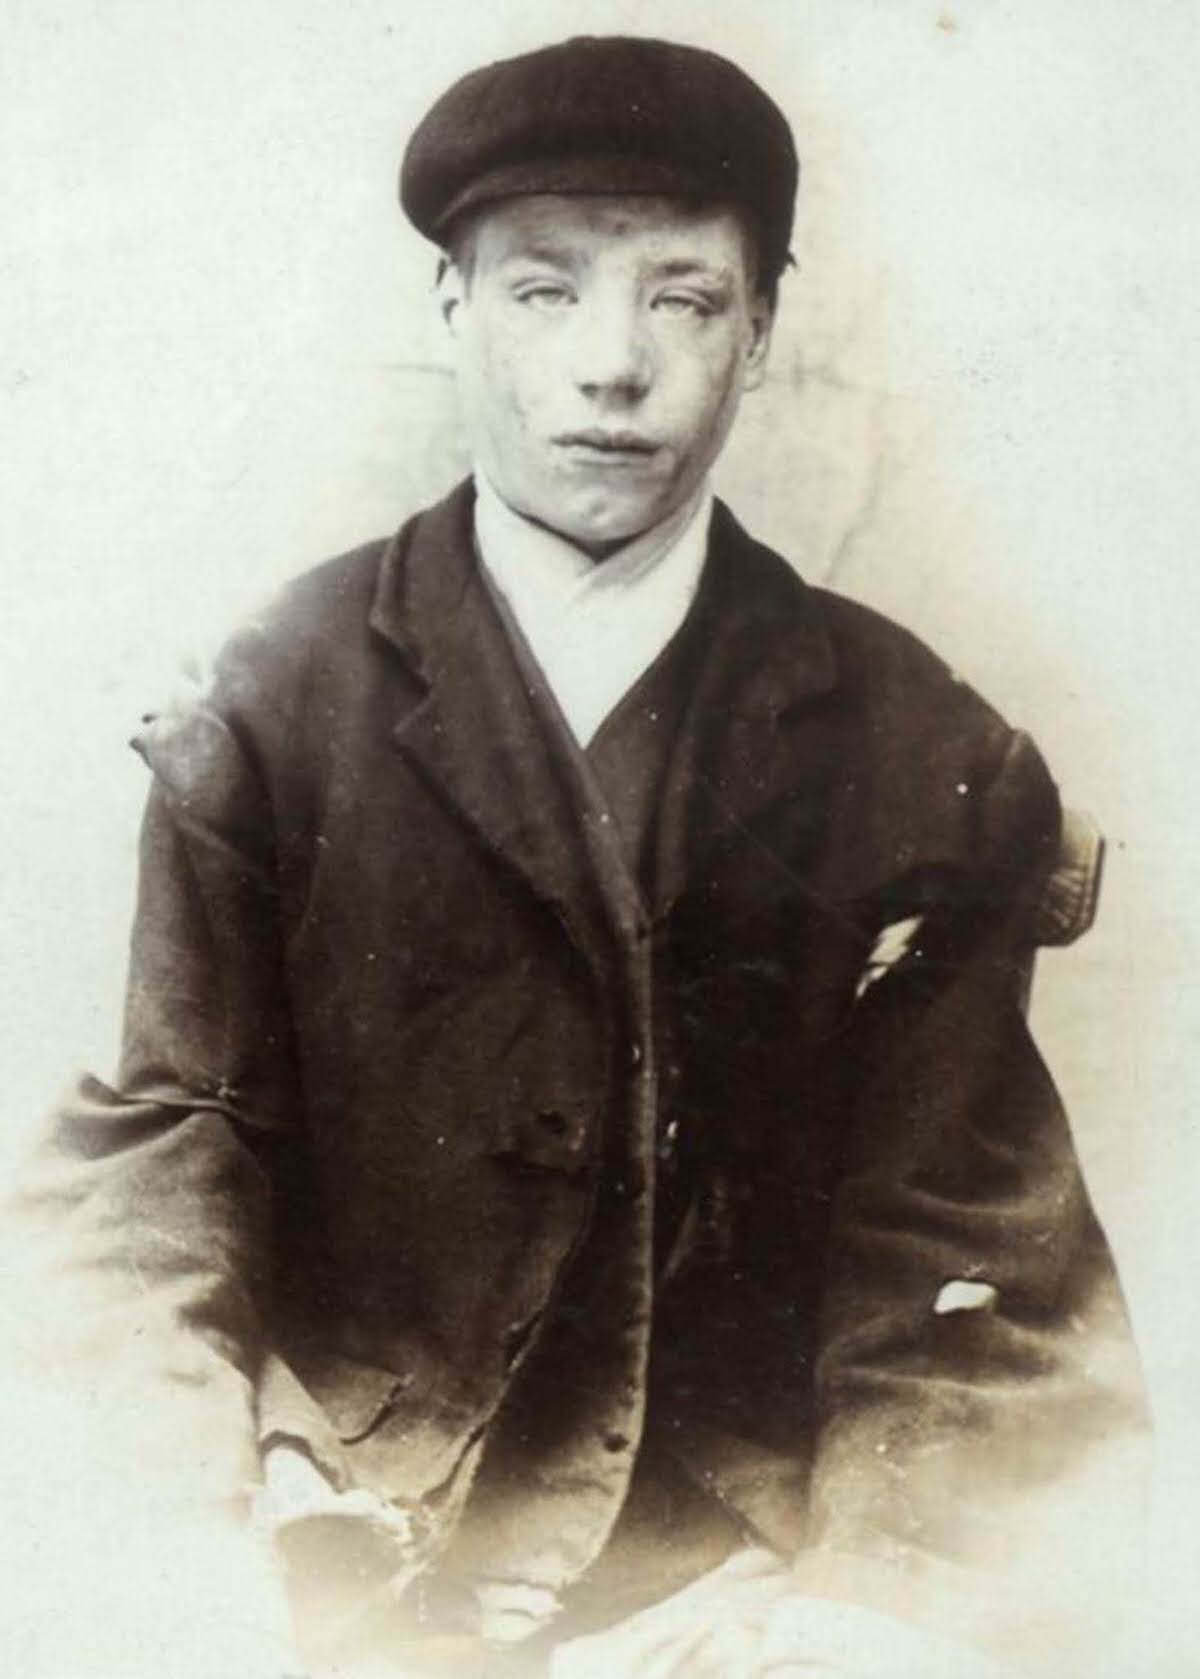 Charles Marr, 14, arrested for an undisclosed reason, 1906.